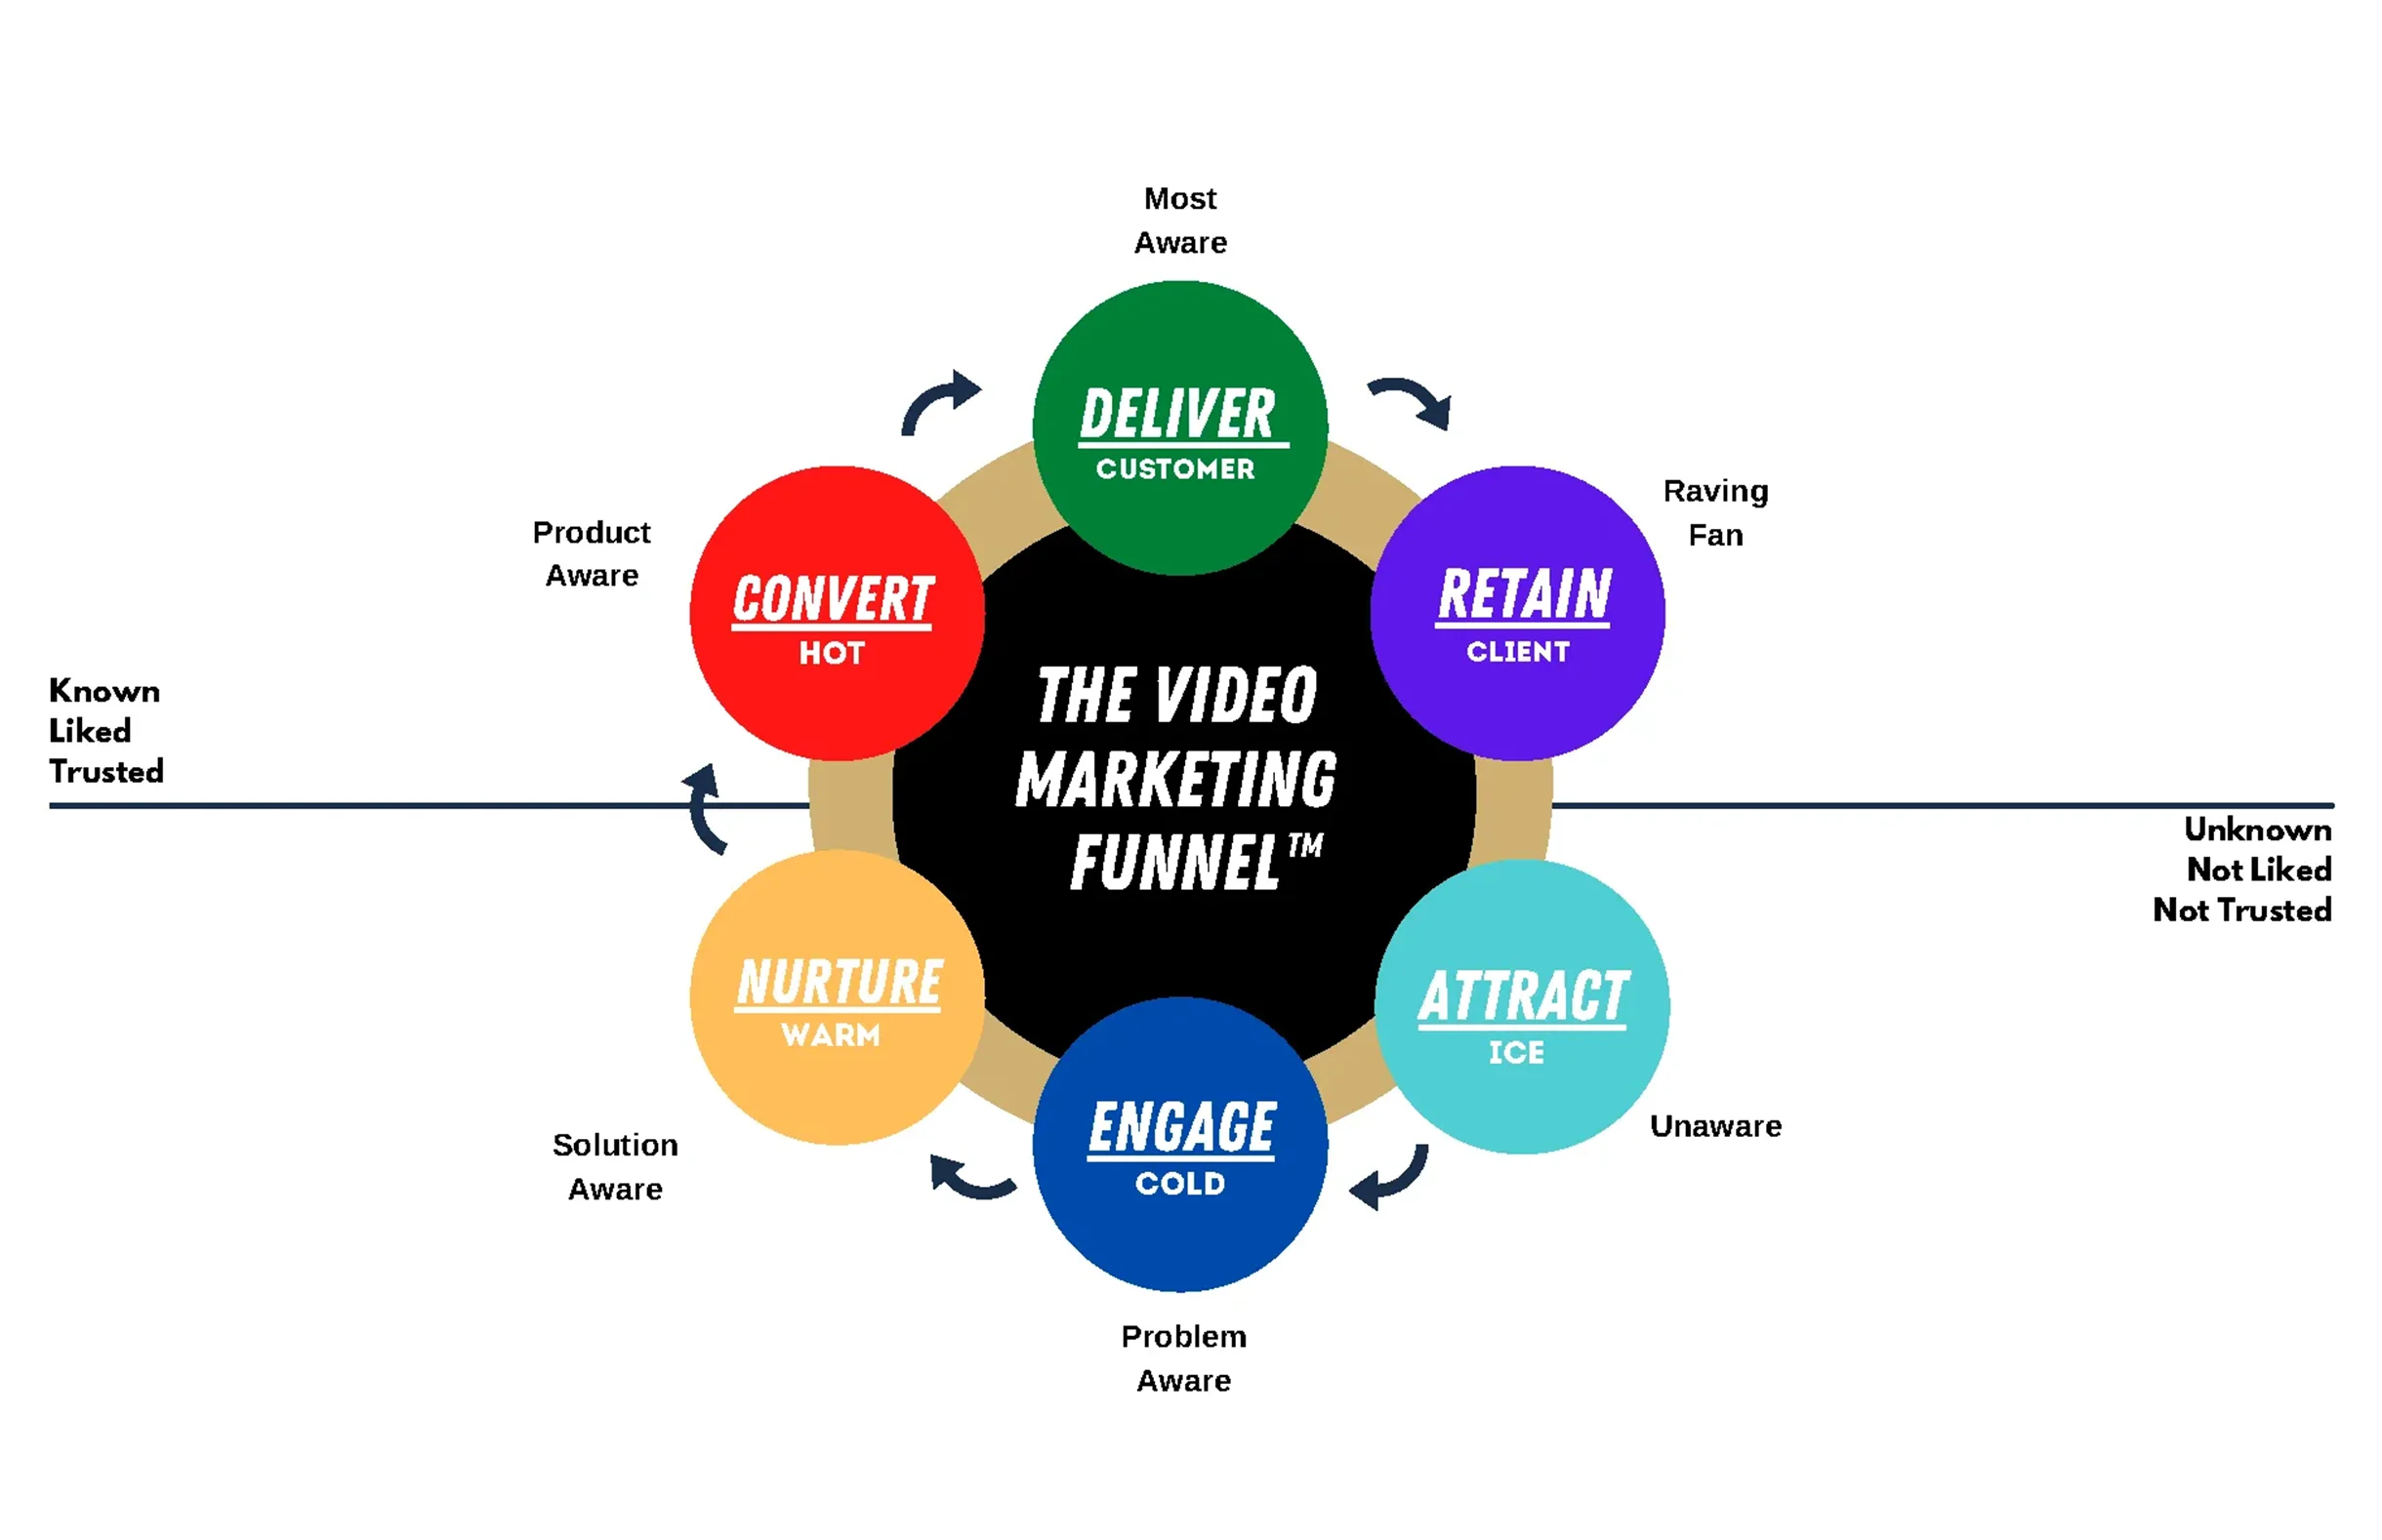 The Video Marketing Funnel